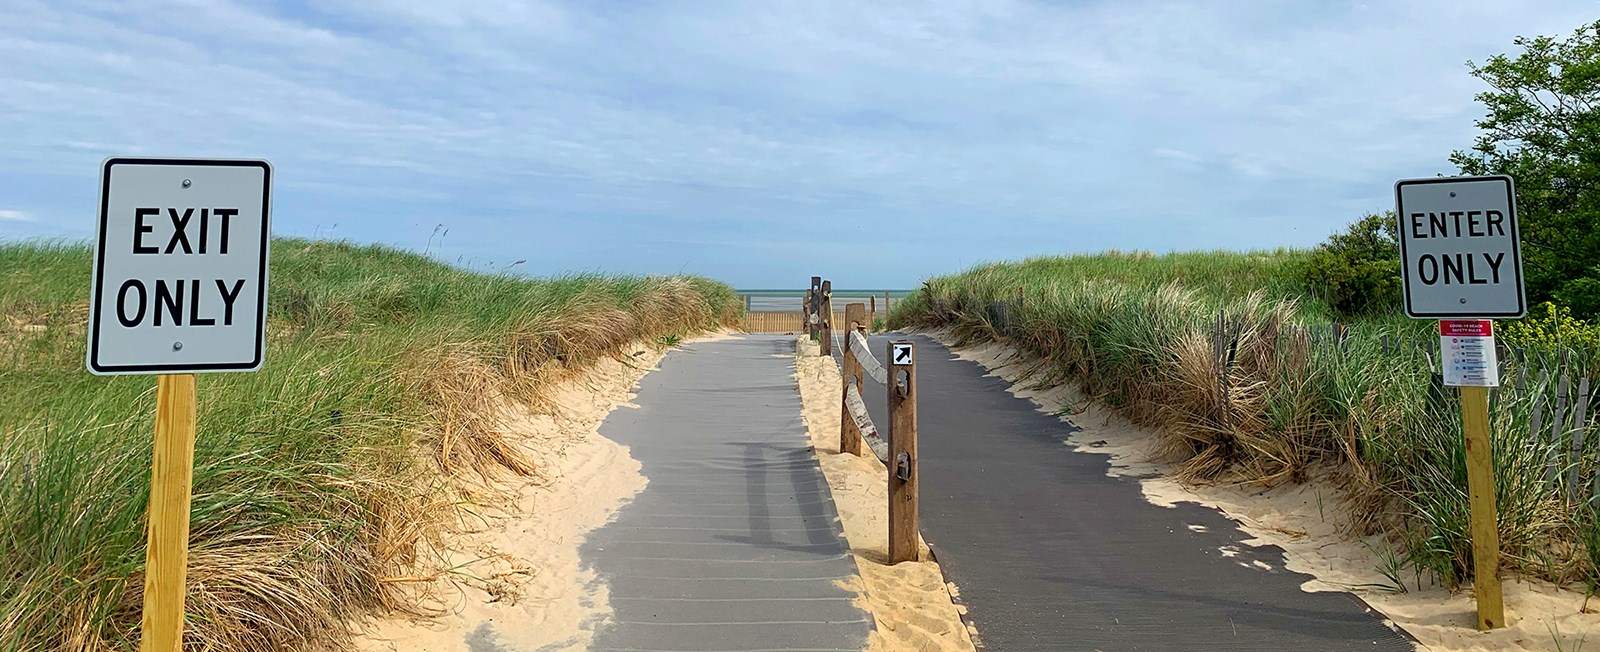 This summer will be different from past summers. Here are some things you might expect to be different at Cape Cod beaches during Covid-19.